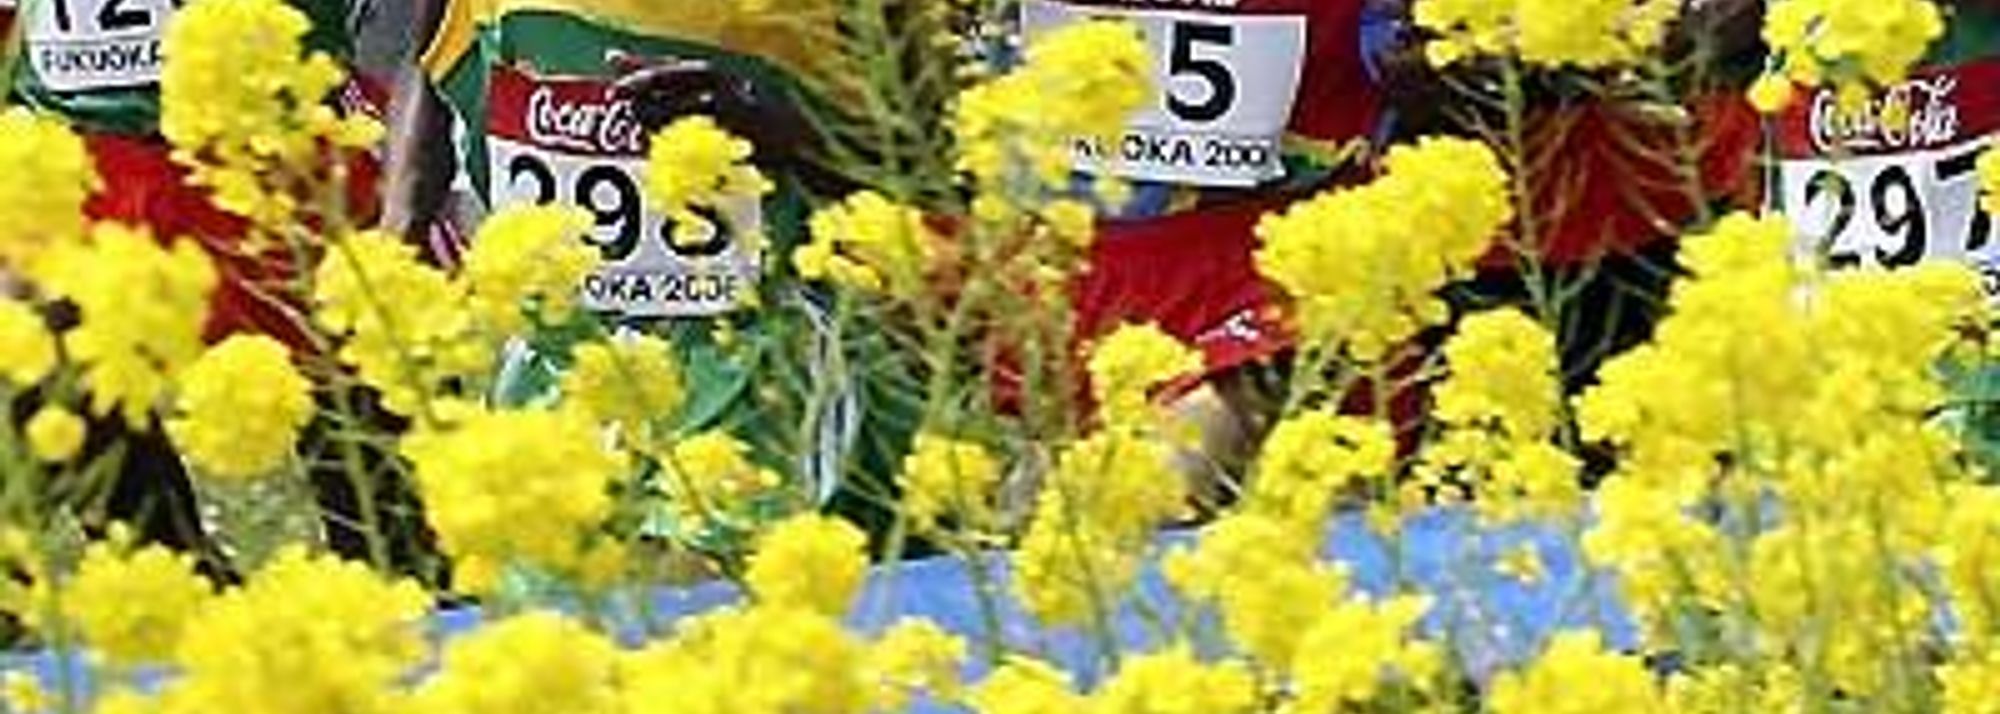 Five years after his older brother won the men's World Cross Country junior race in Ostend, Tariku Bekele arrived in Fukuoka looking for a championship of his own. Where Kenenisa had been a family trailblazer, with only his own results to speak for him (including a silver in the 2001 short race before winning the junior race,) Tariku bore the expectations that come with a heavy name.